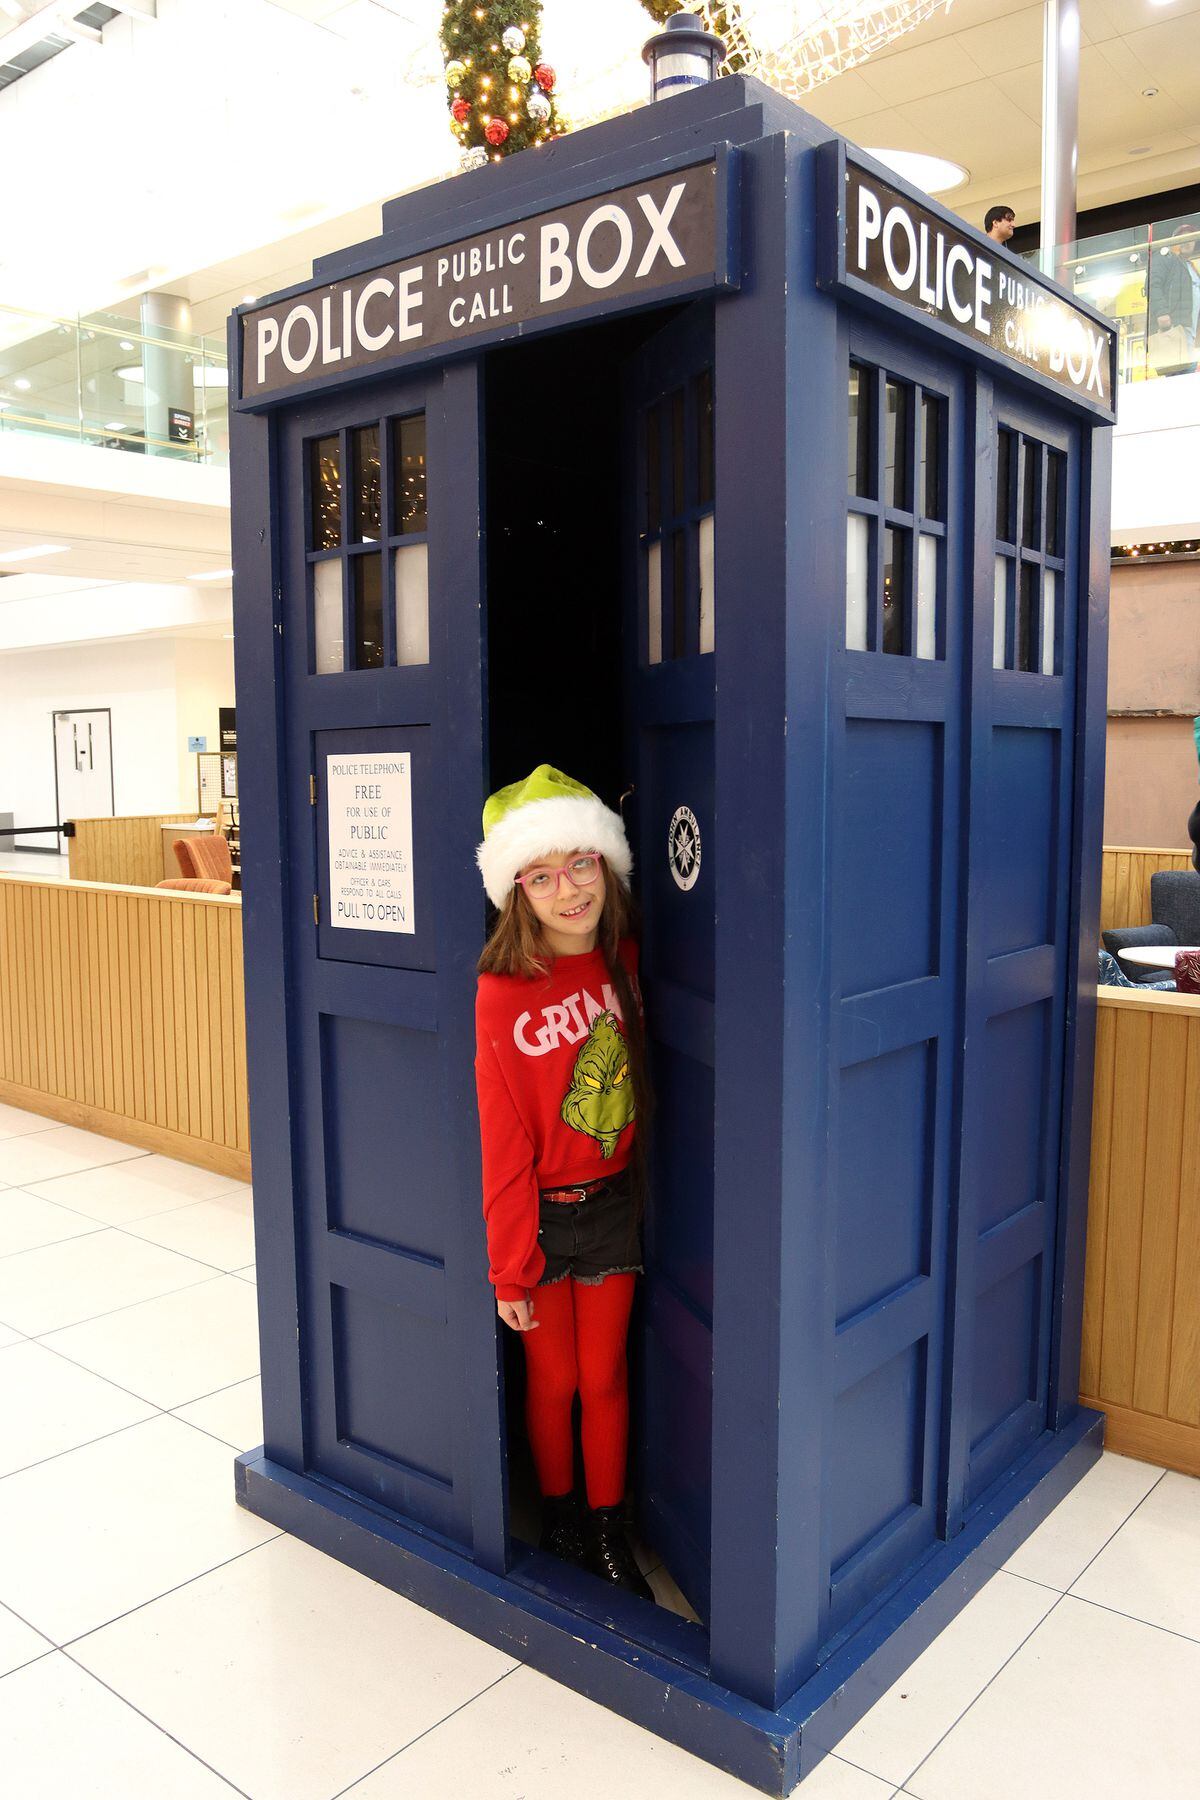 Marnie Thomas, nine, checks out the Tardis from Doctor Who